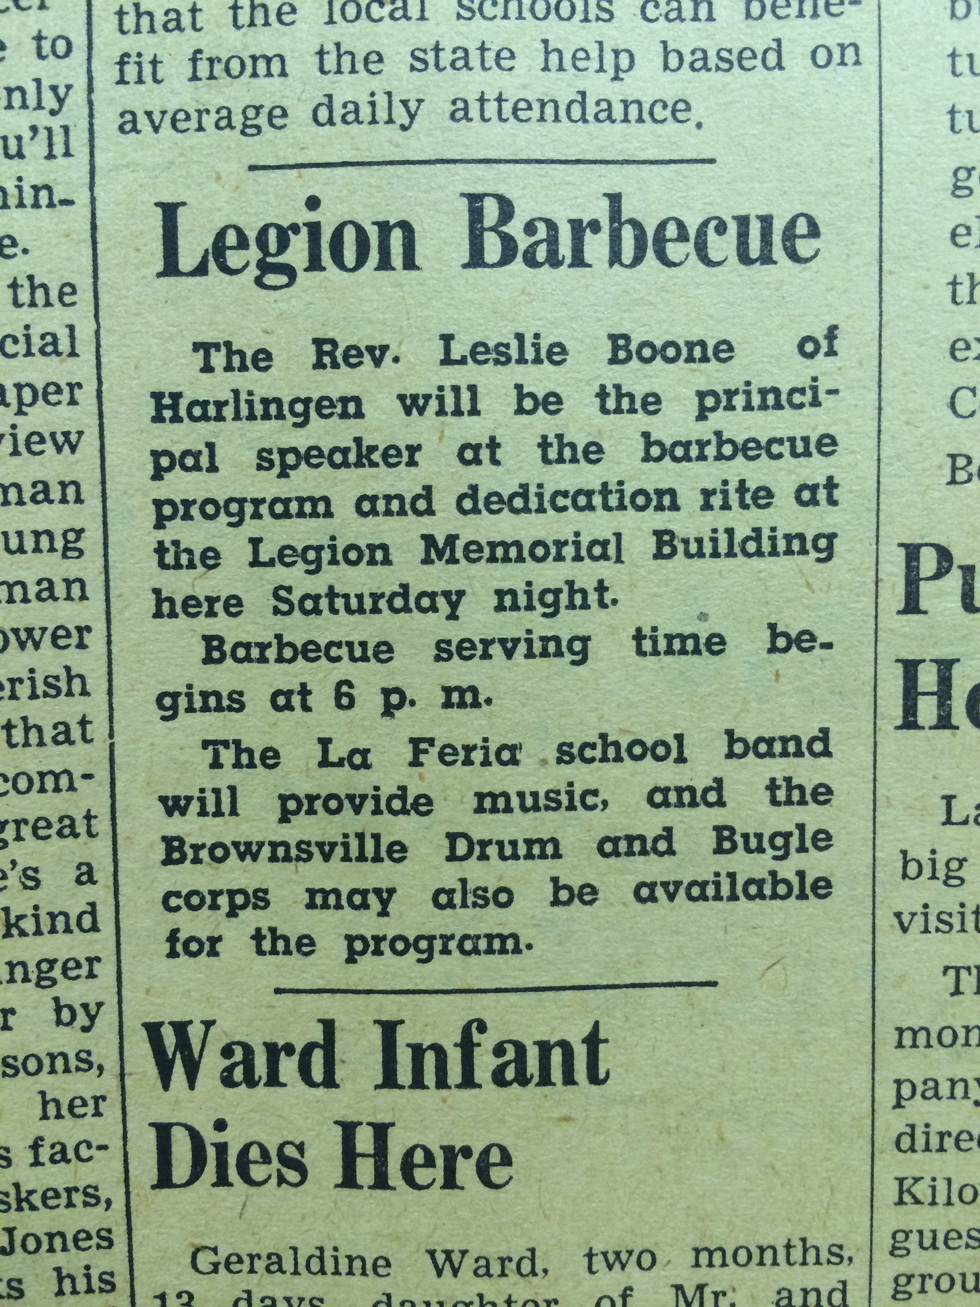 This small announcement was on the front page of the October 13, 1949 issue of LA FERIA NEWS advertising the dedication of the American Legion Post Memorial building on Saturday, October 15, 1949. Photo: LFN Archives.